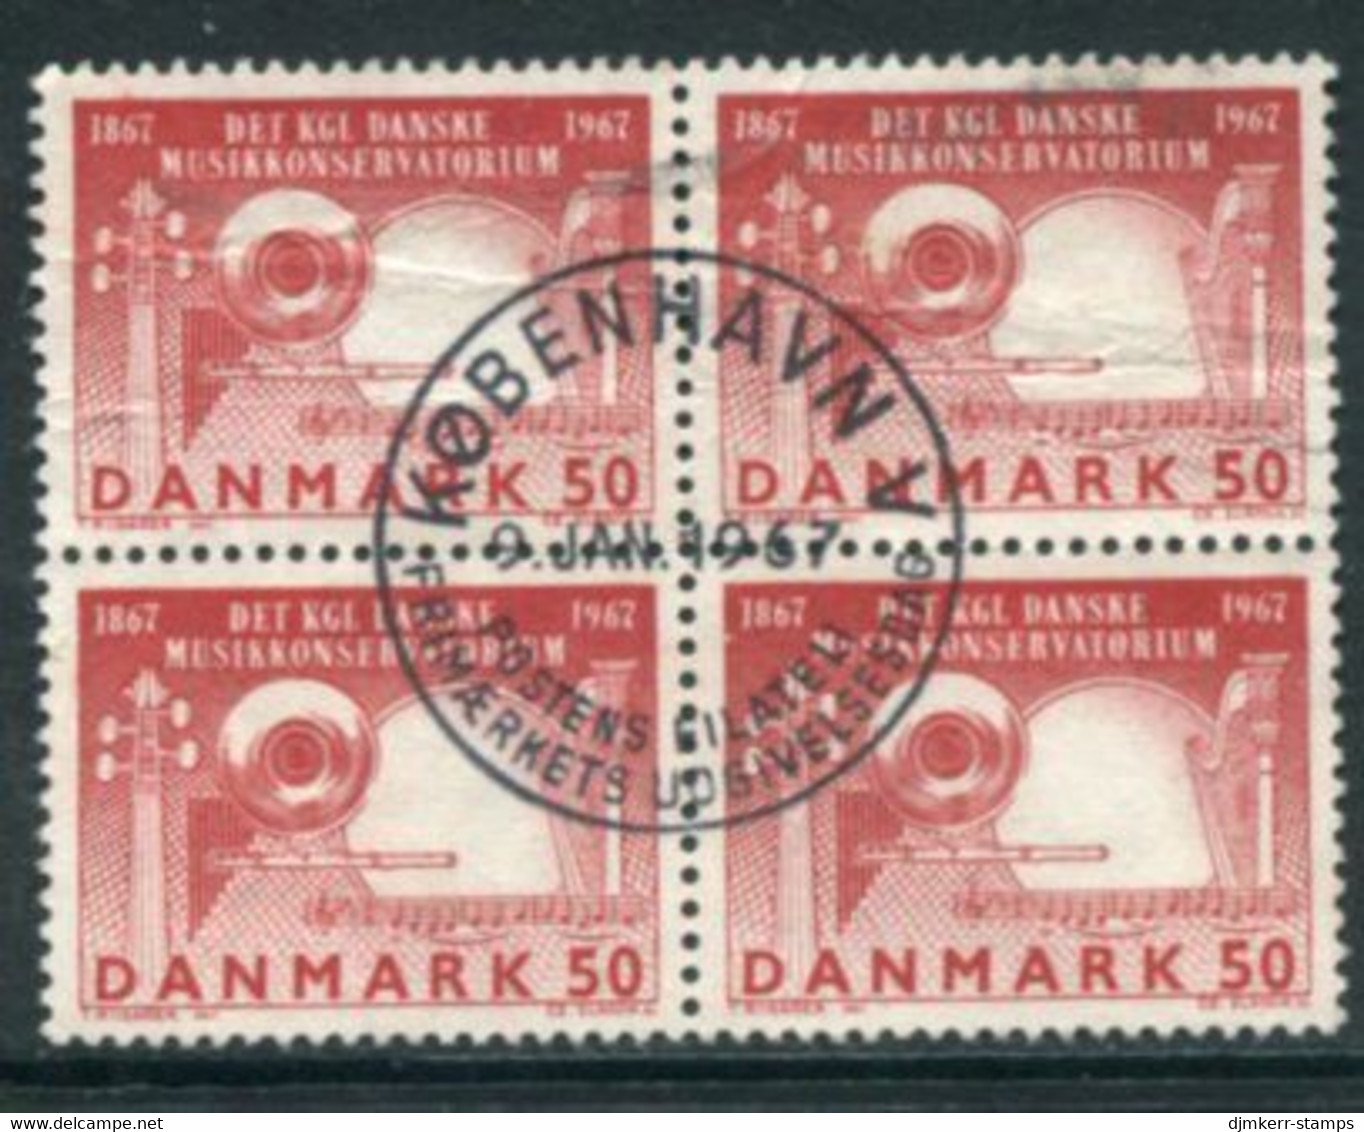 DENMARK 1967 Royal Music Conservatory Block Of 4 Used   Michel 449x - Used Stamps